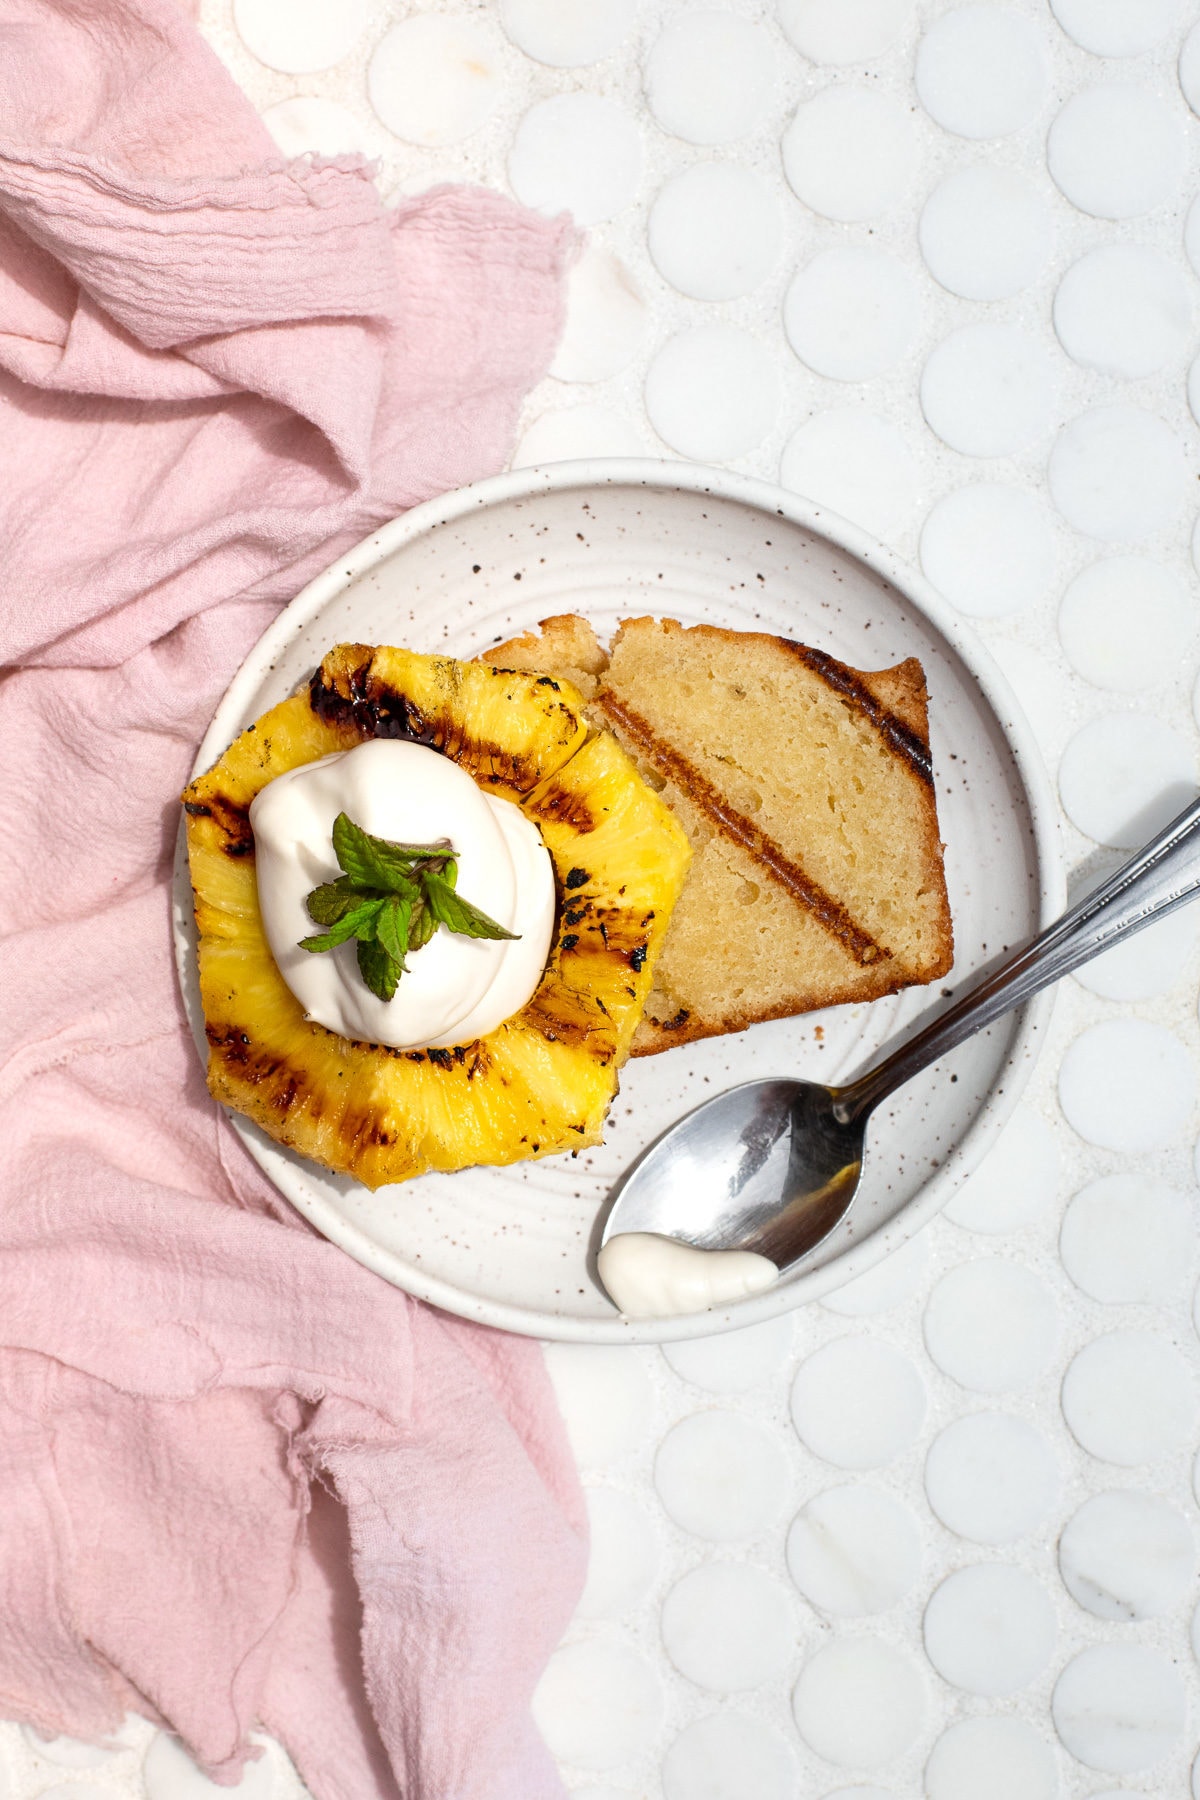 Overhead view of a slice of grilled pound cake topped with grilled pineapple and whipped cream.